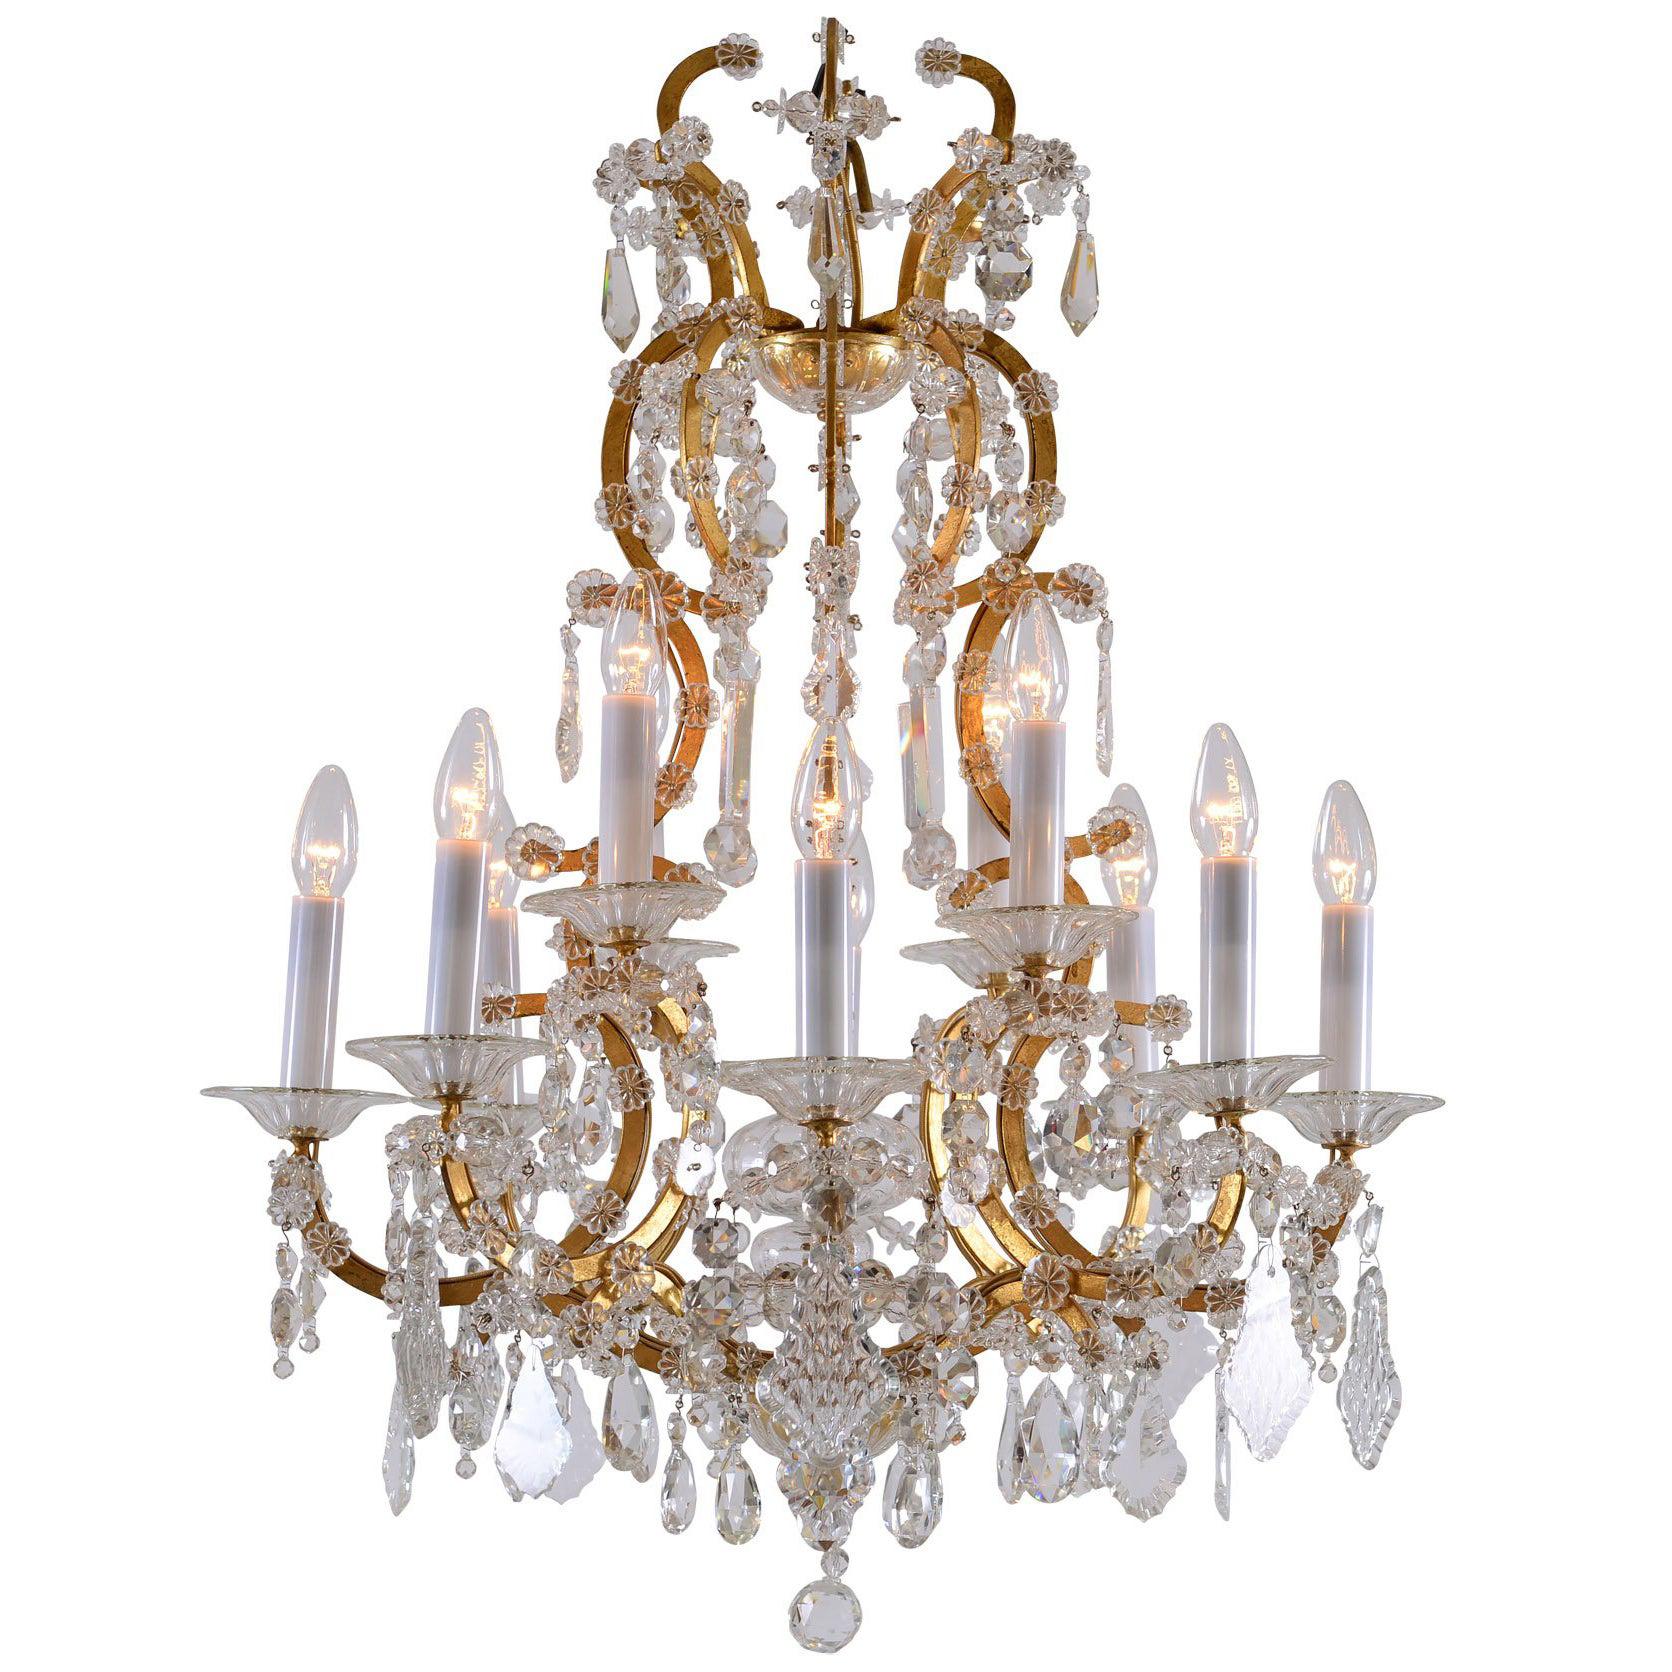 Original Maria Theresien Style Crystal Chandelier with Rich Prism Hanging